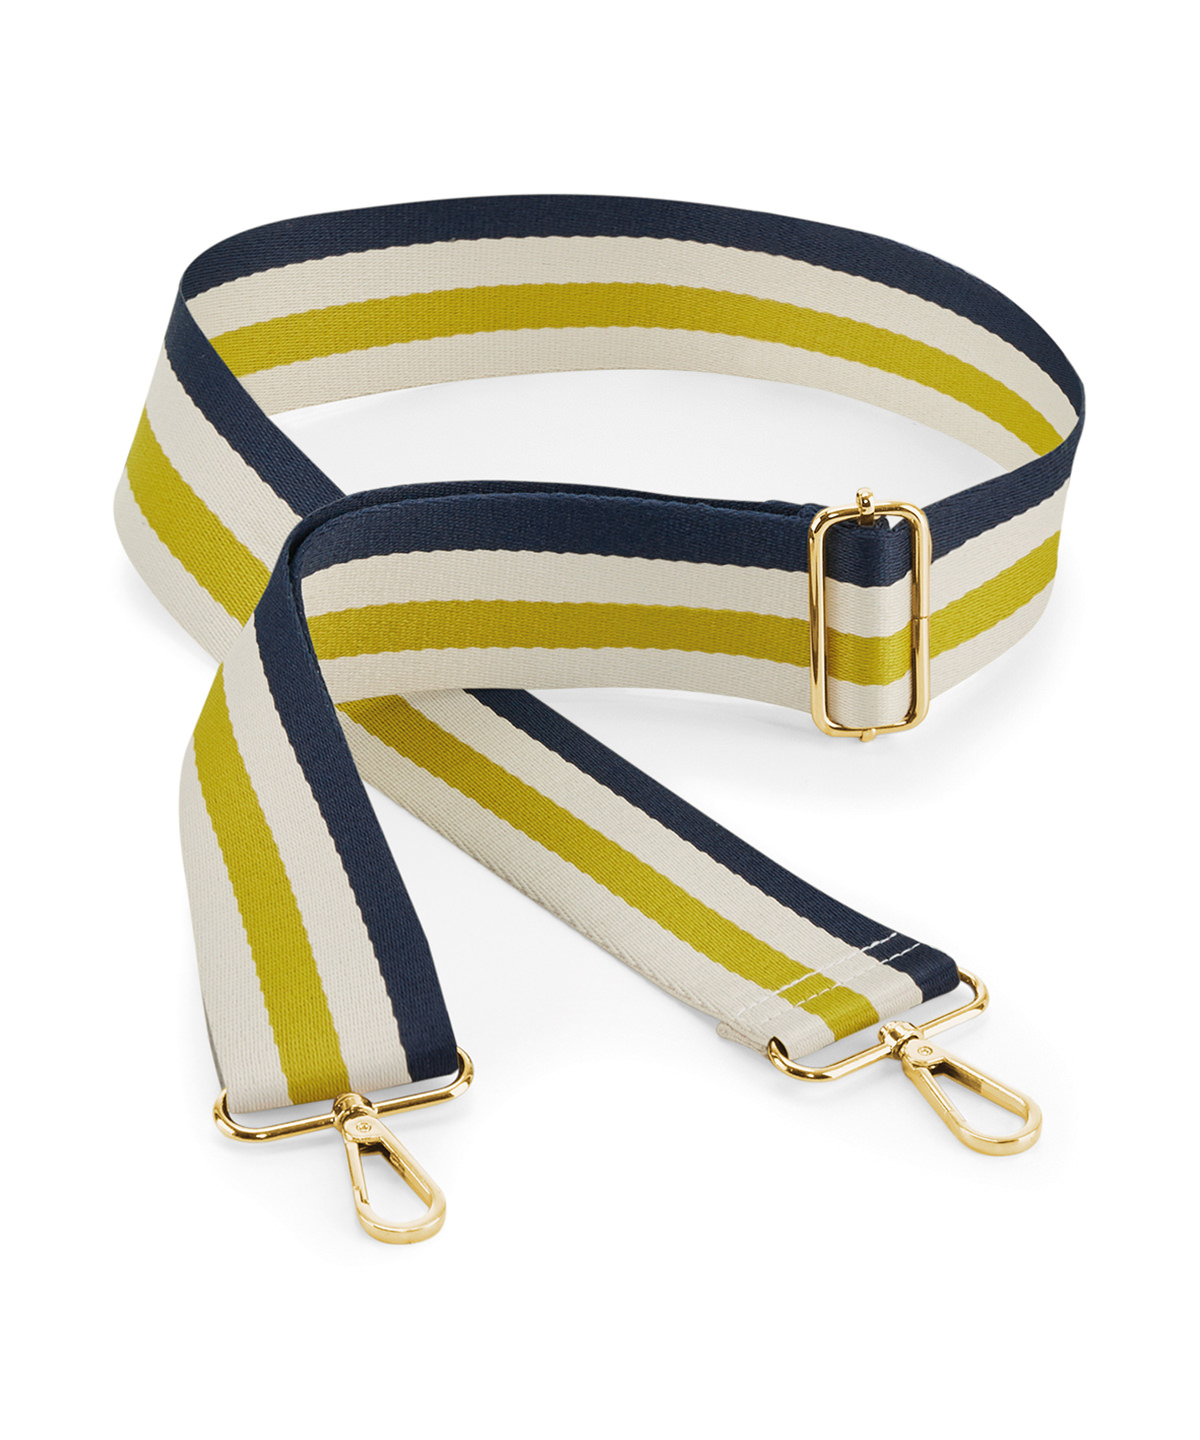 Boutique Adjustable Bag Strap Navy/Oyster/Yellow Size One size